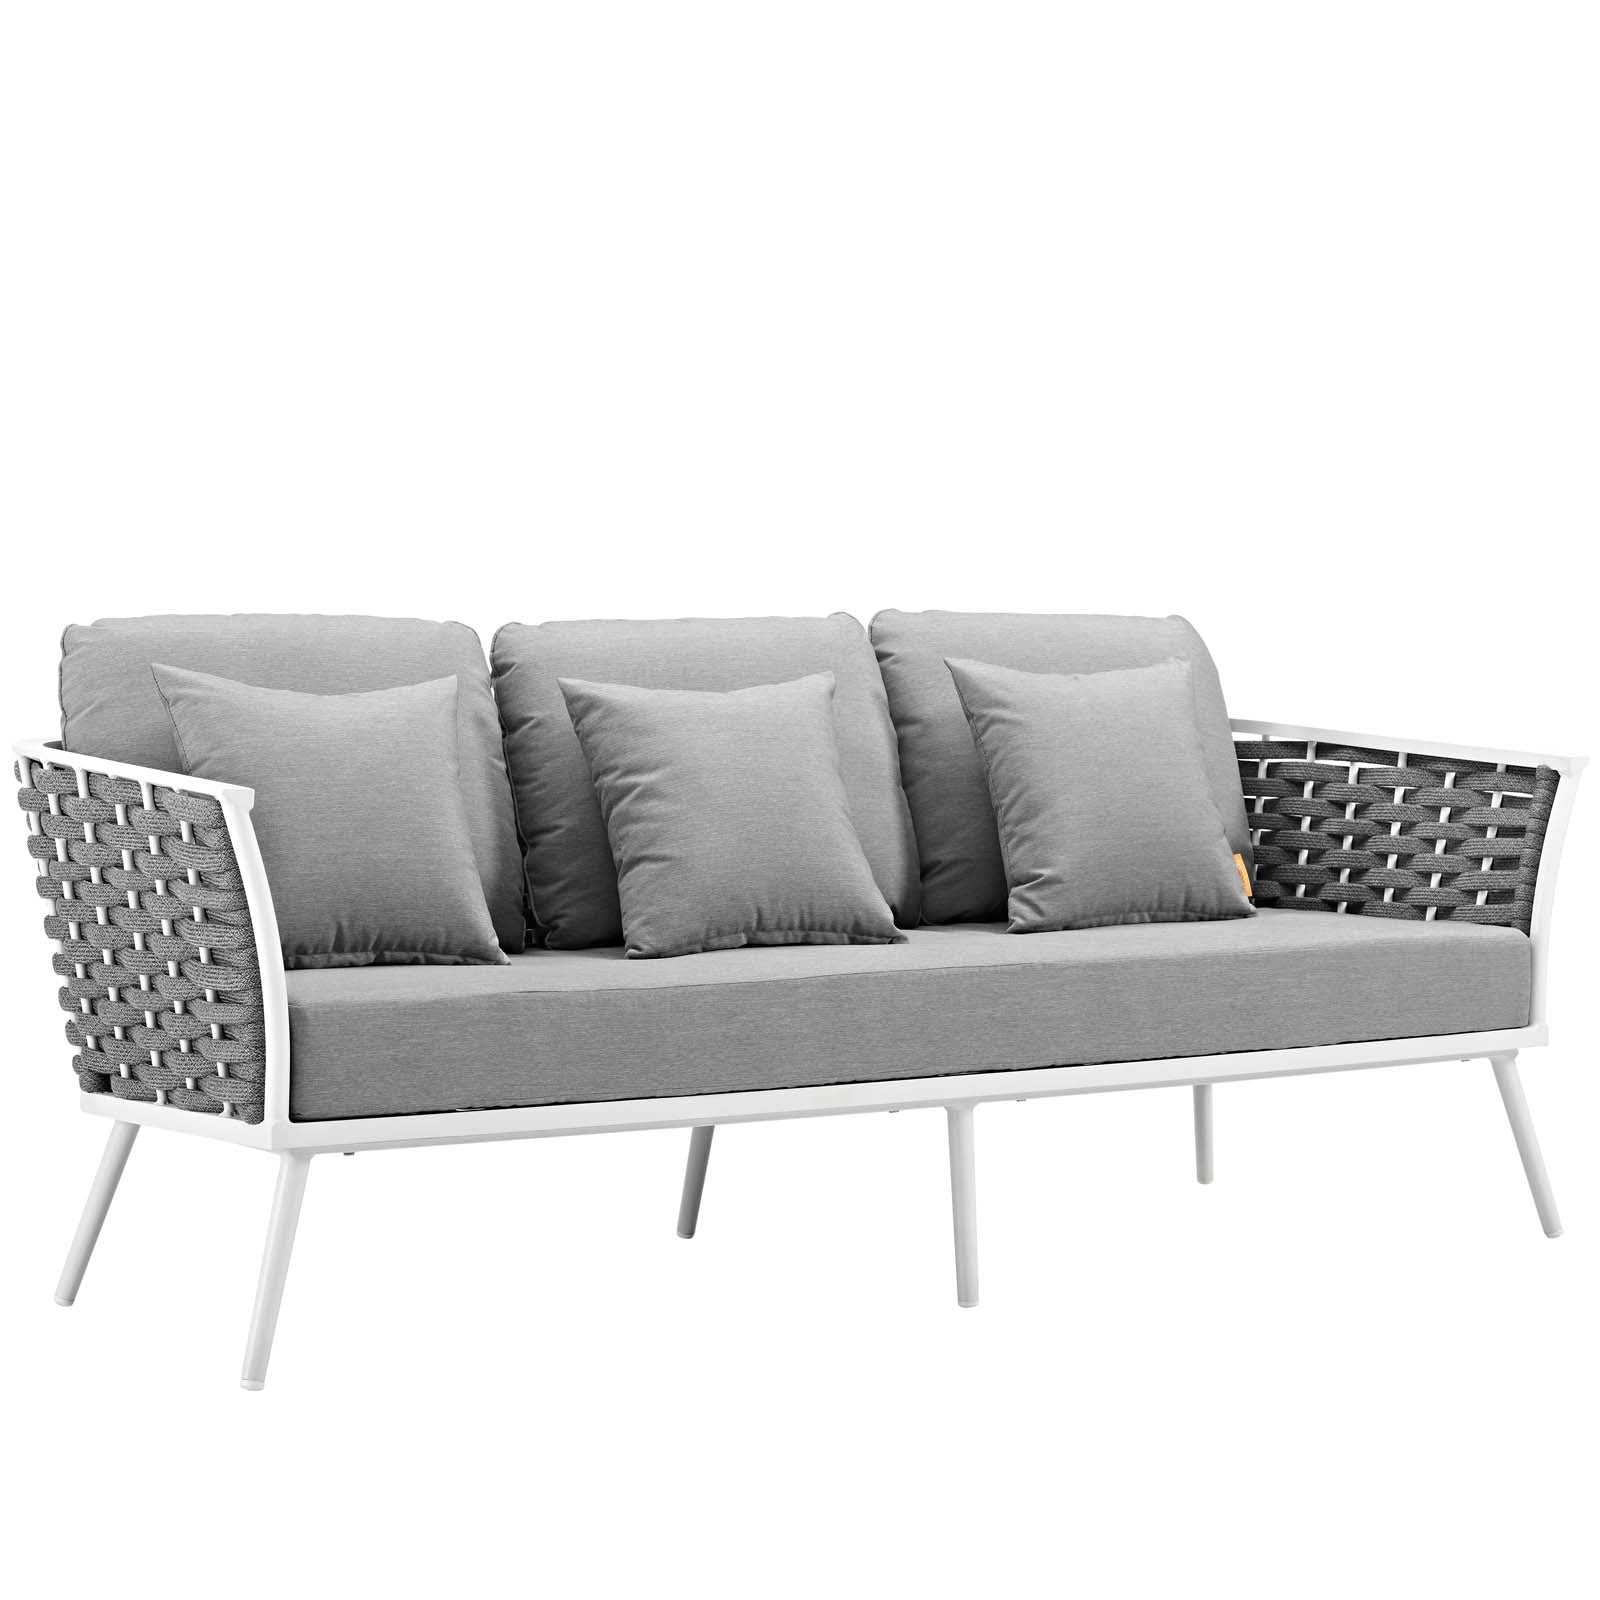 Stance 7 Piece Outdoor Patio Aluminum Sectional Sofa Set-Outdoor Set-Modway-Wall2Wall Furnishings